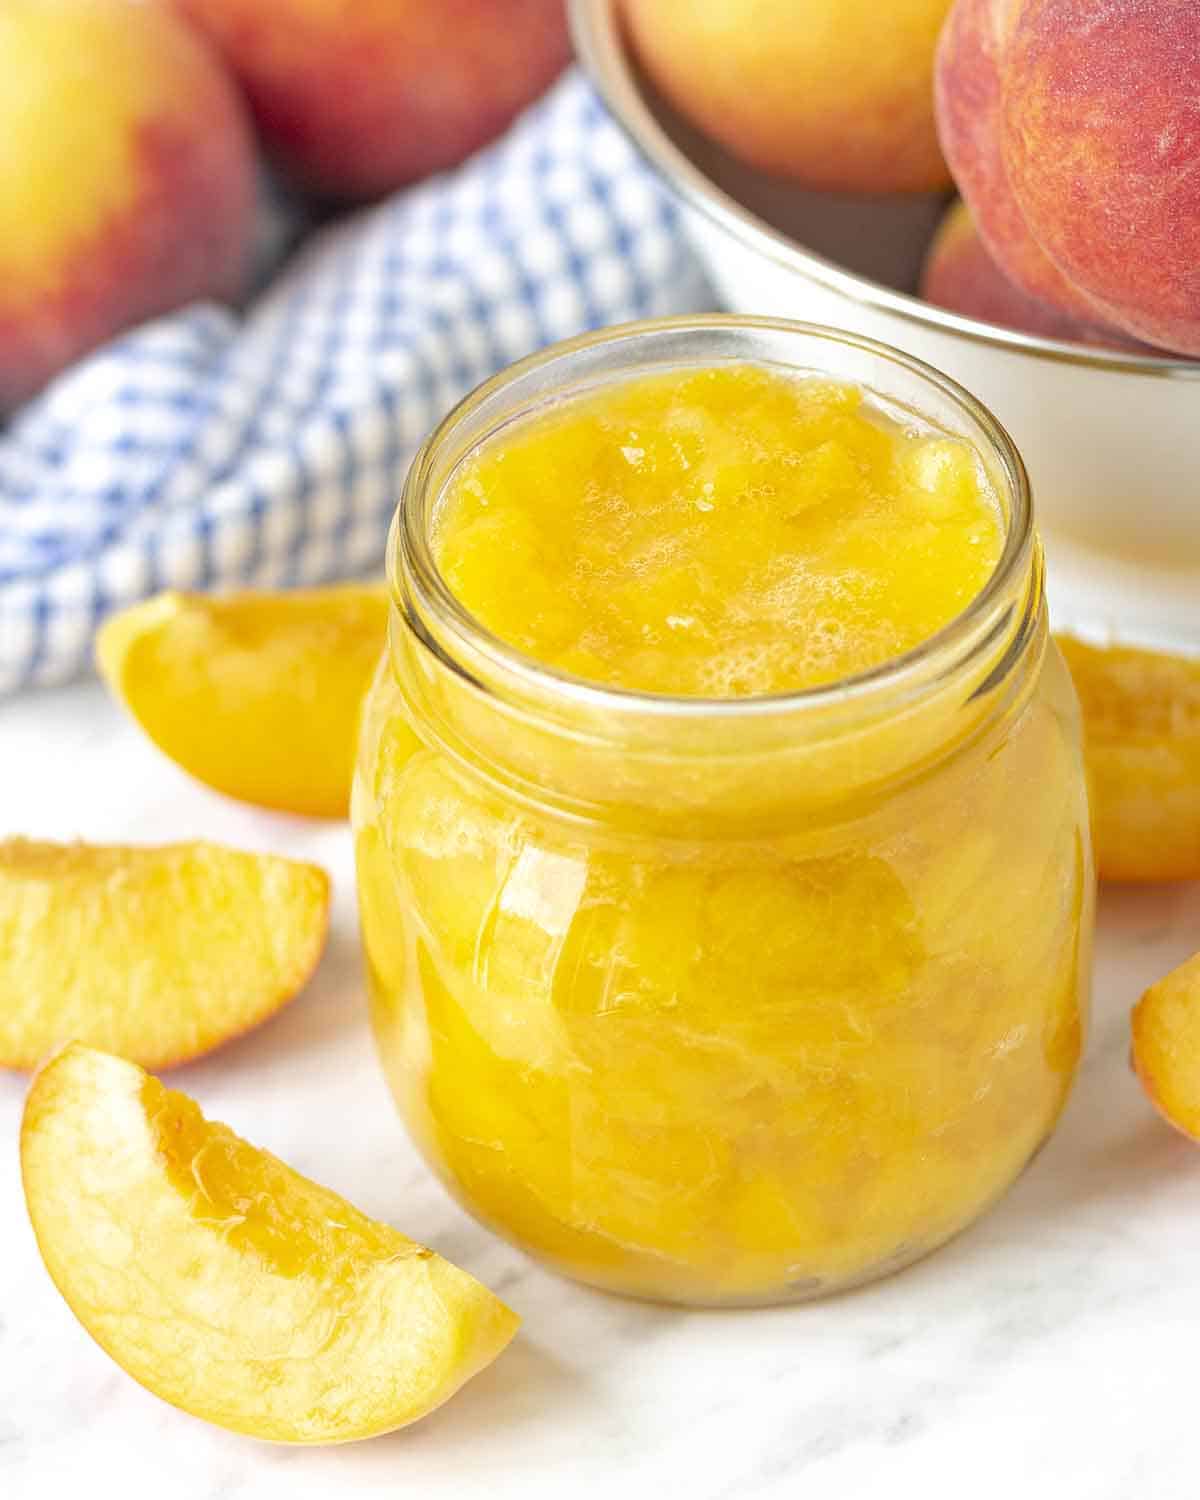 An overhead view showing an opened mason jar filled with homemade peach sauce.